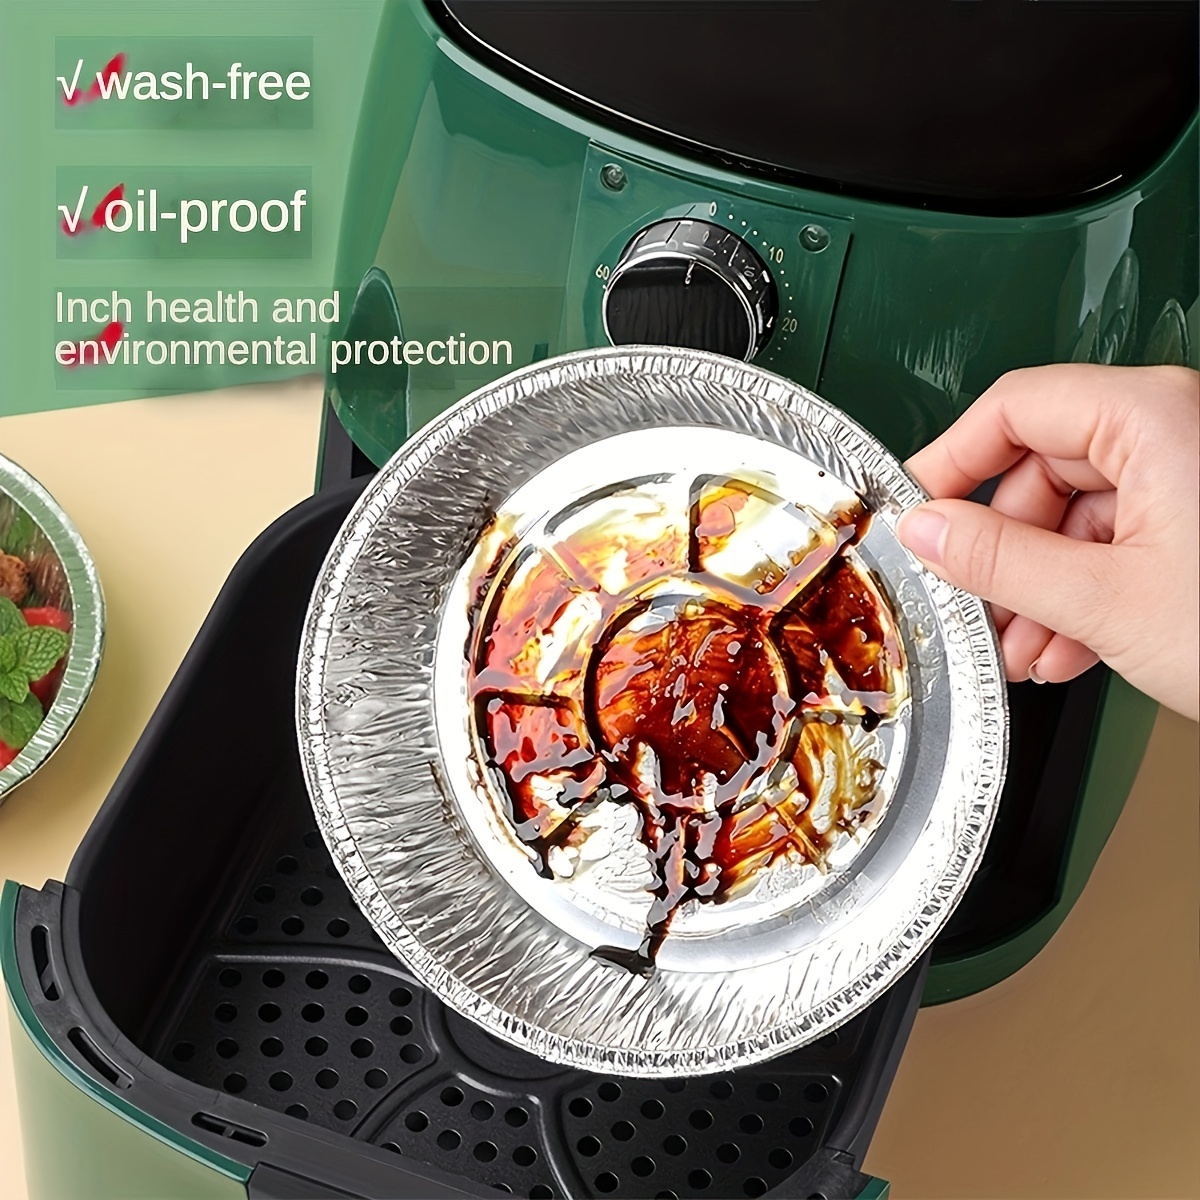 Disposable Baking Pans, Air Fryer Liners Household Oil-absorbing Foil Pans, Oven  Baking Trays, Tin Foil Paper Baking Pans, Oil-proof Barbecue Pans, Kitchen  Supplies - Temu